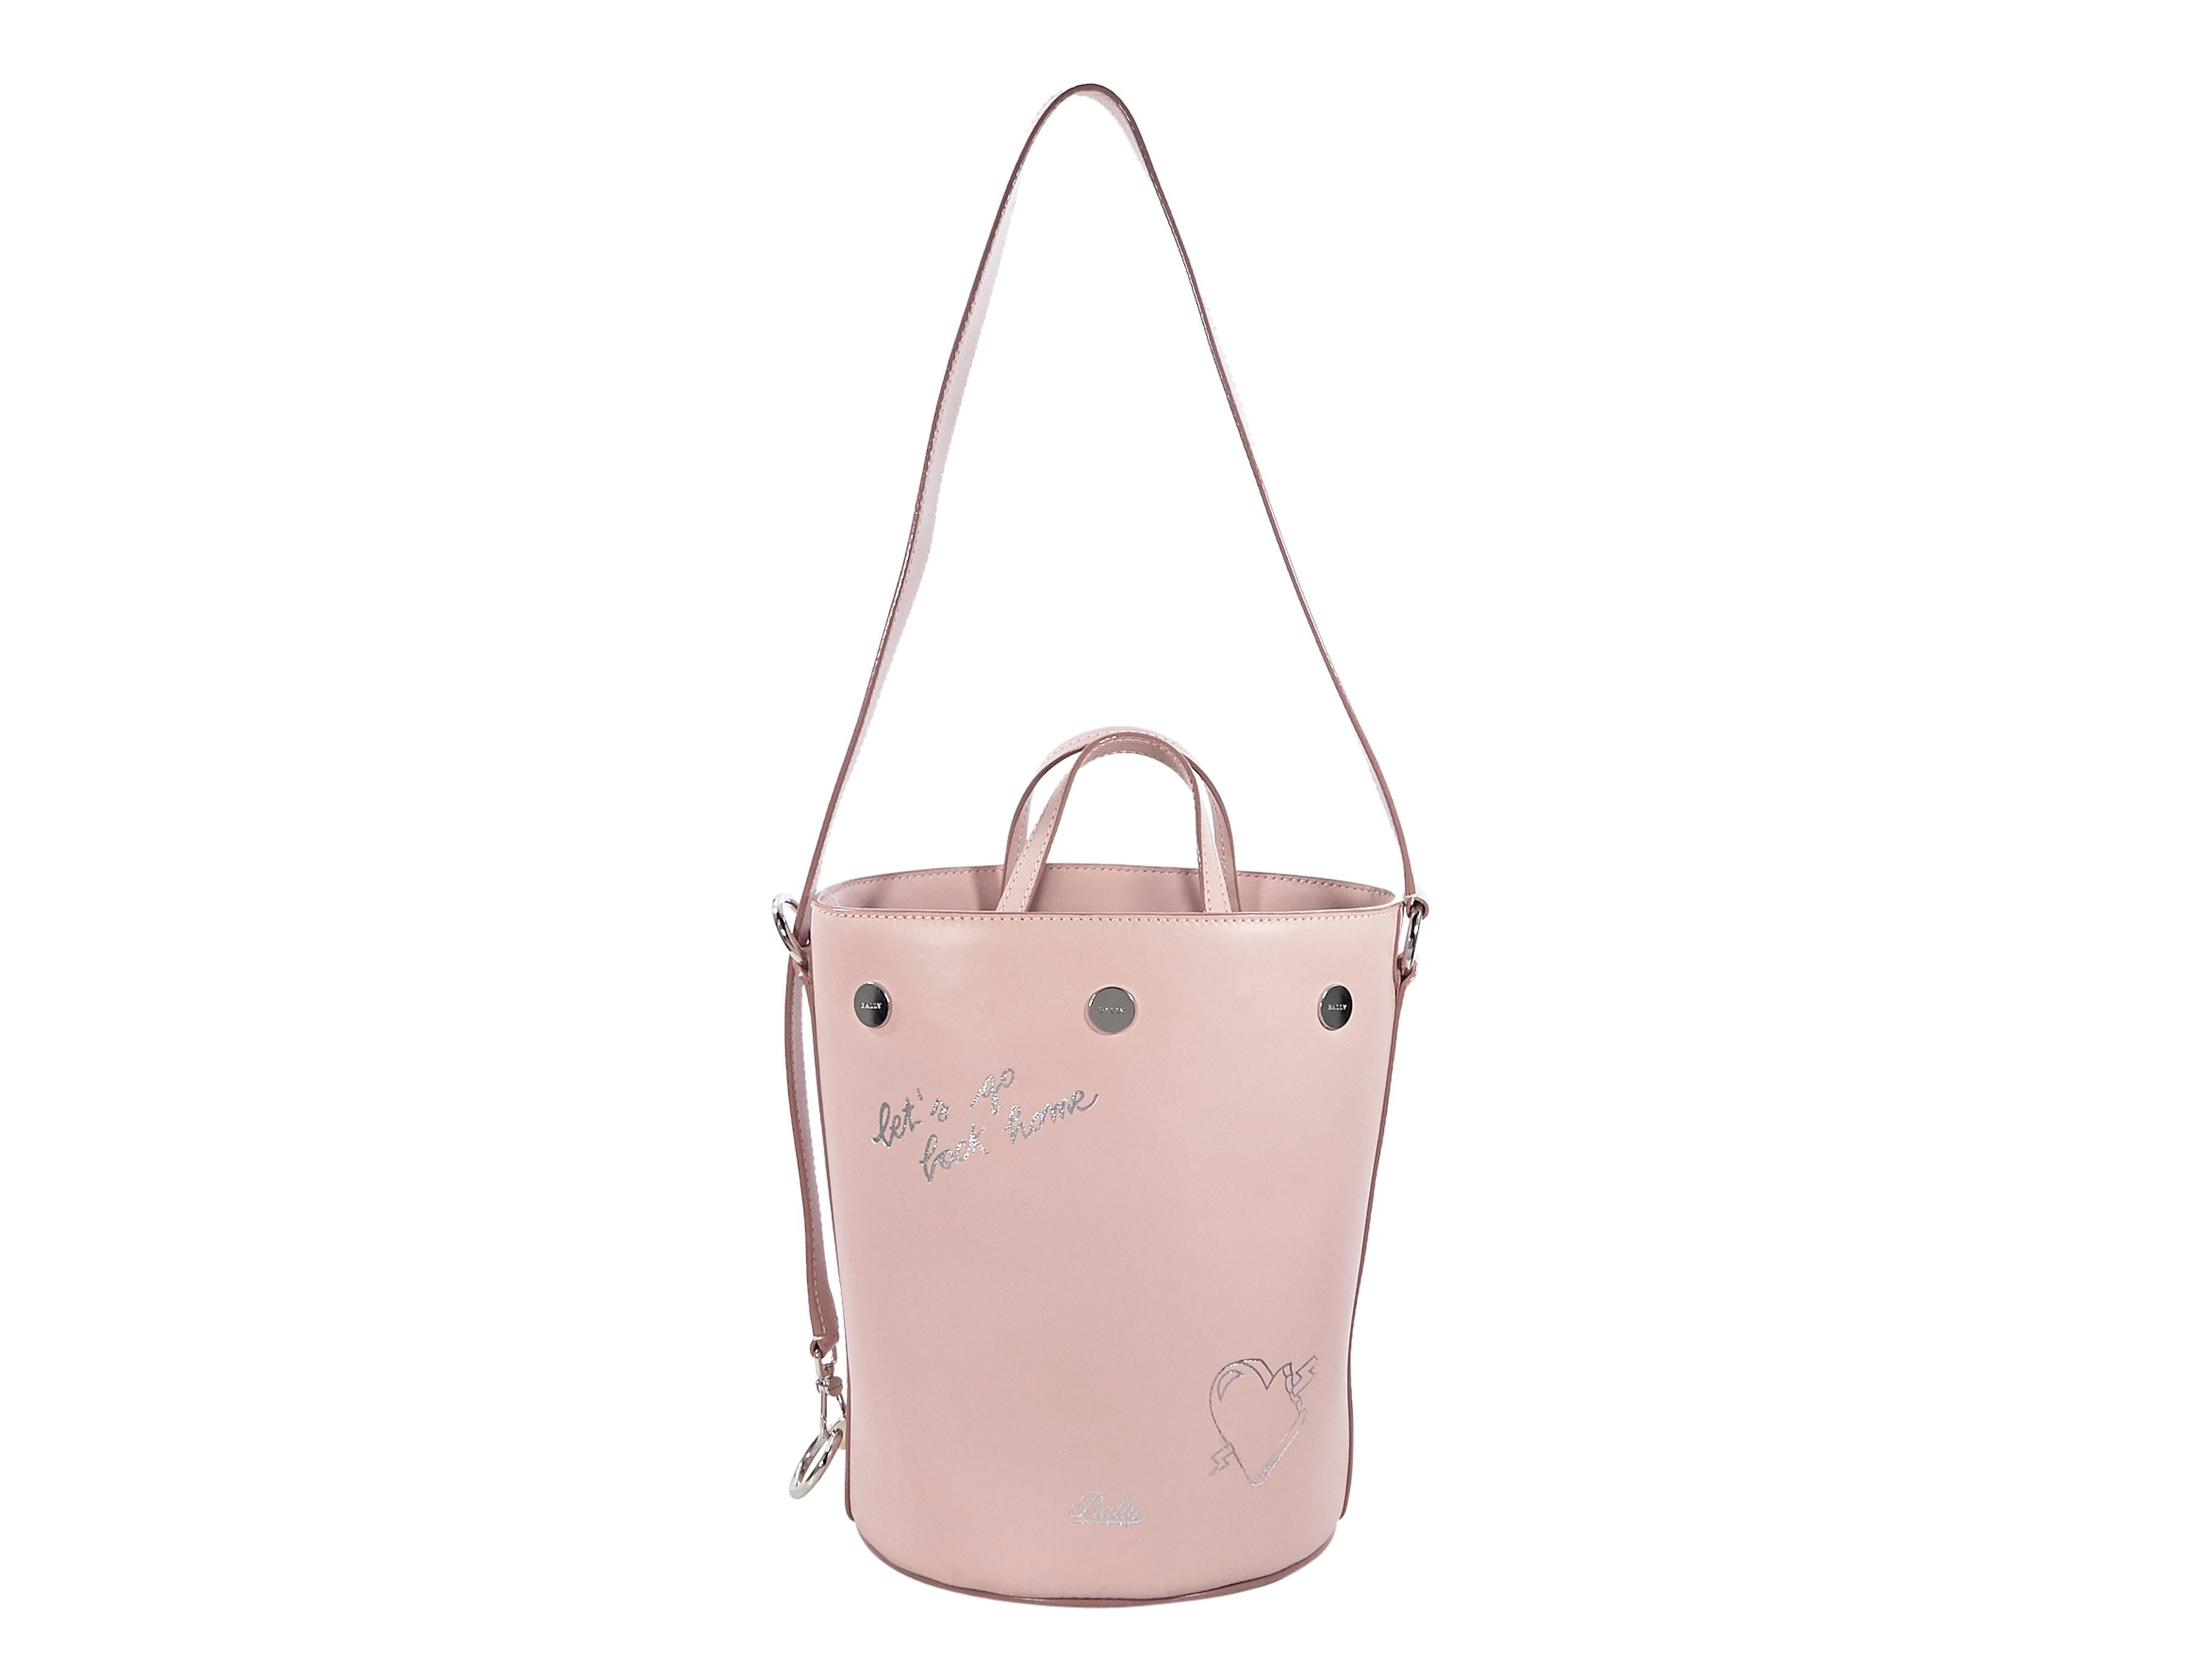 Product details:  Pink leather bucket bag by Bally.  Dual carry handles.  Adjustable shoulder strap.  Top drawstring closure.  Silvertone hardware.  7